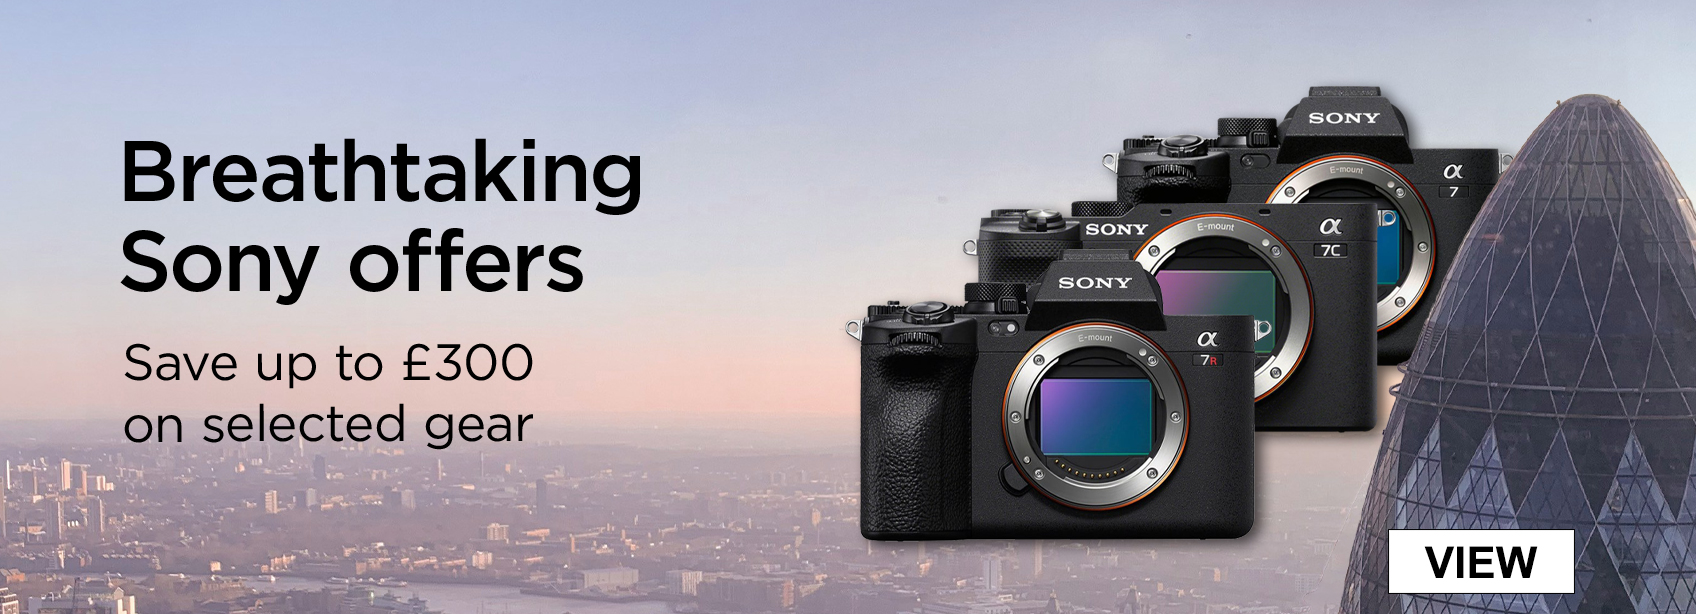 Breathtaking Sony Offers. Save up to £300 on selected gear